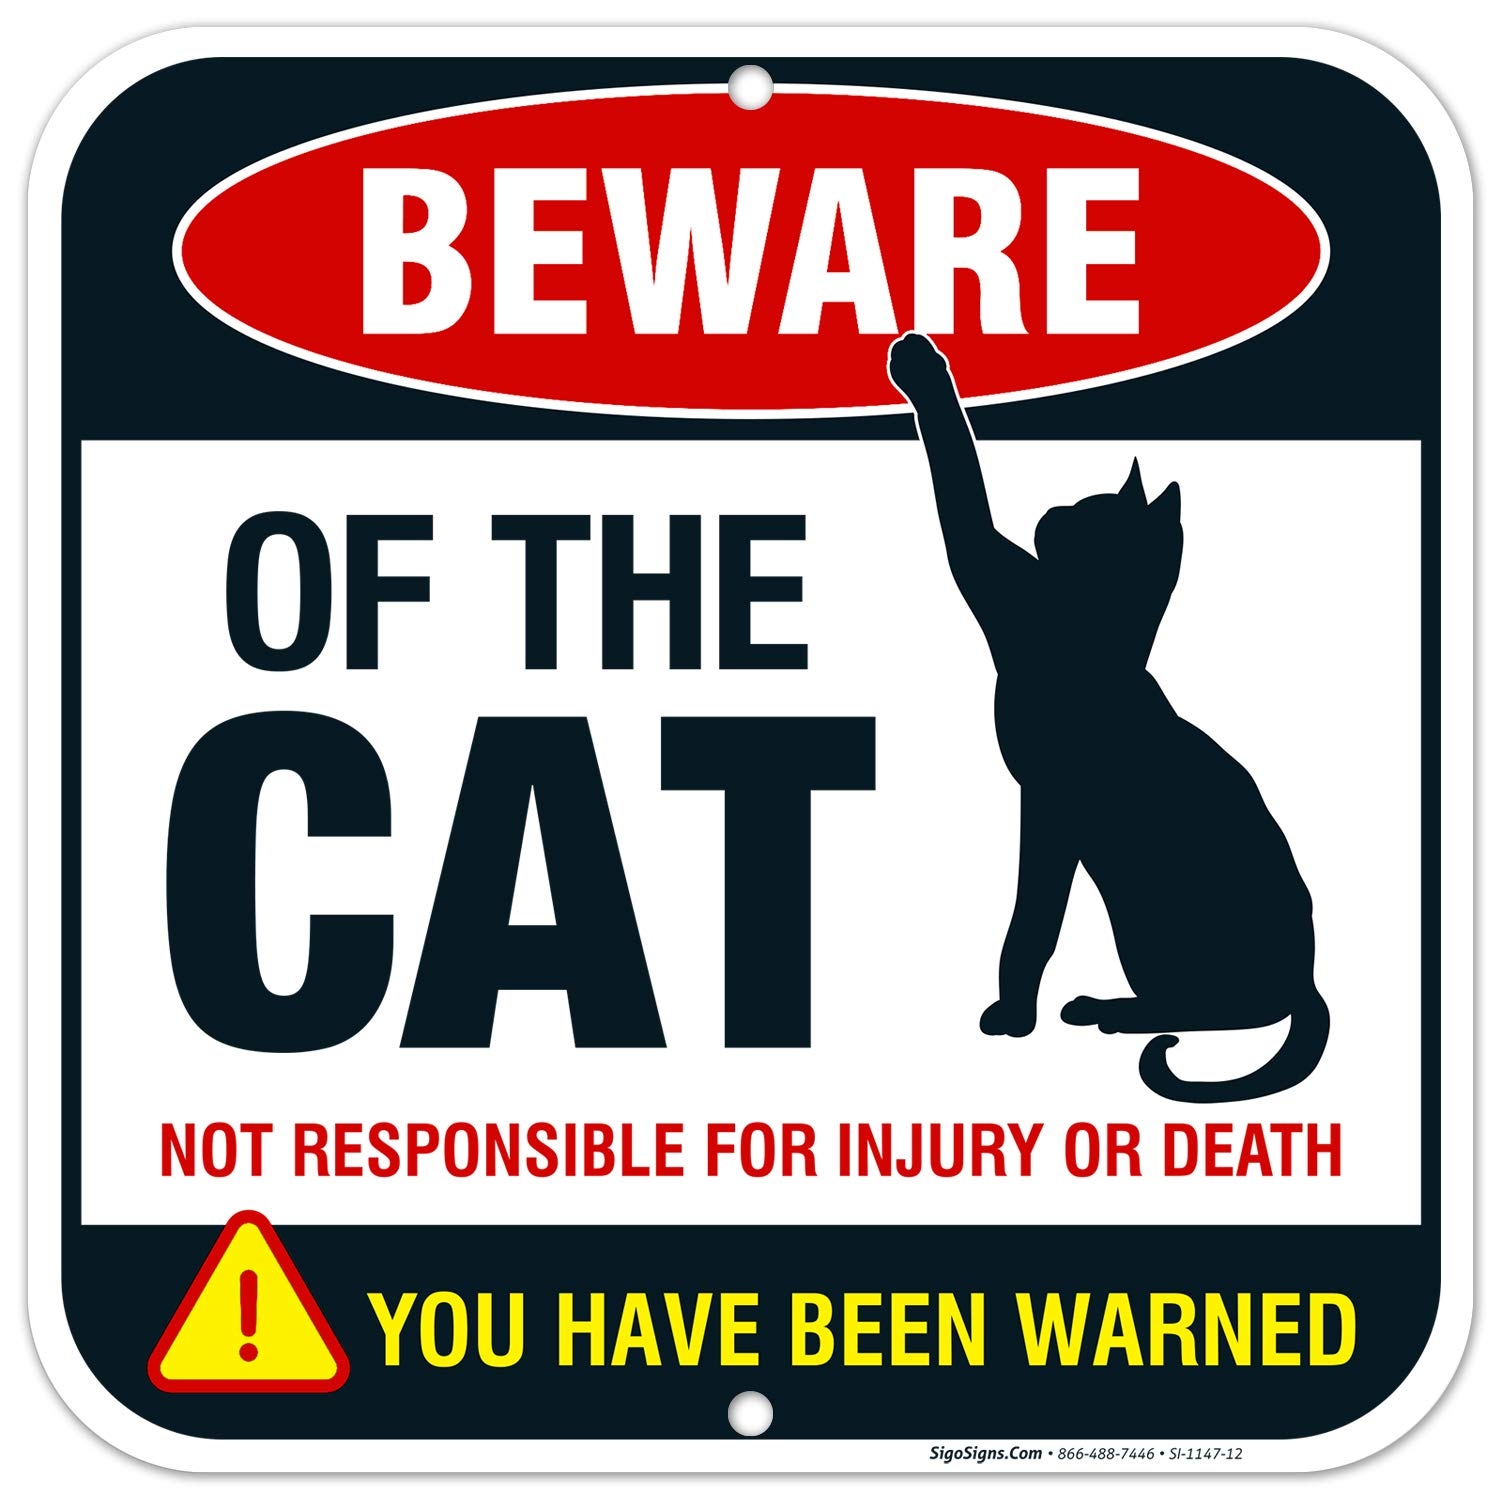 Amazon Beware Of Cat Sign Funny Attack Cat Sign 12x12 Square Rust Free Aluminum Weather Fade Resistant Easy Mounting Indoor Outdoor Use Made In USA By Sigo Signs Patio Lawn Garden